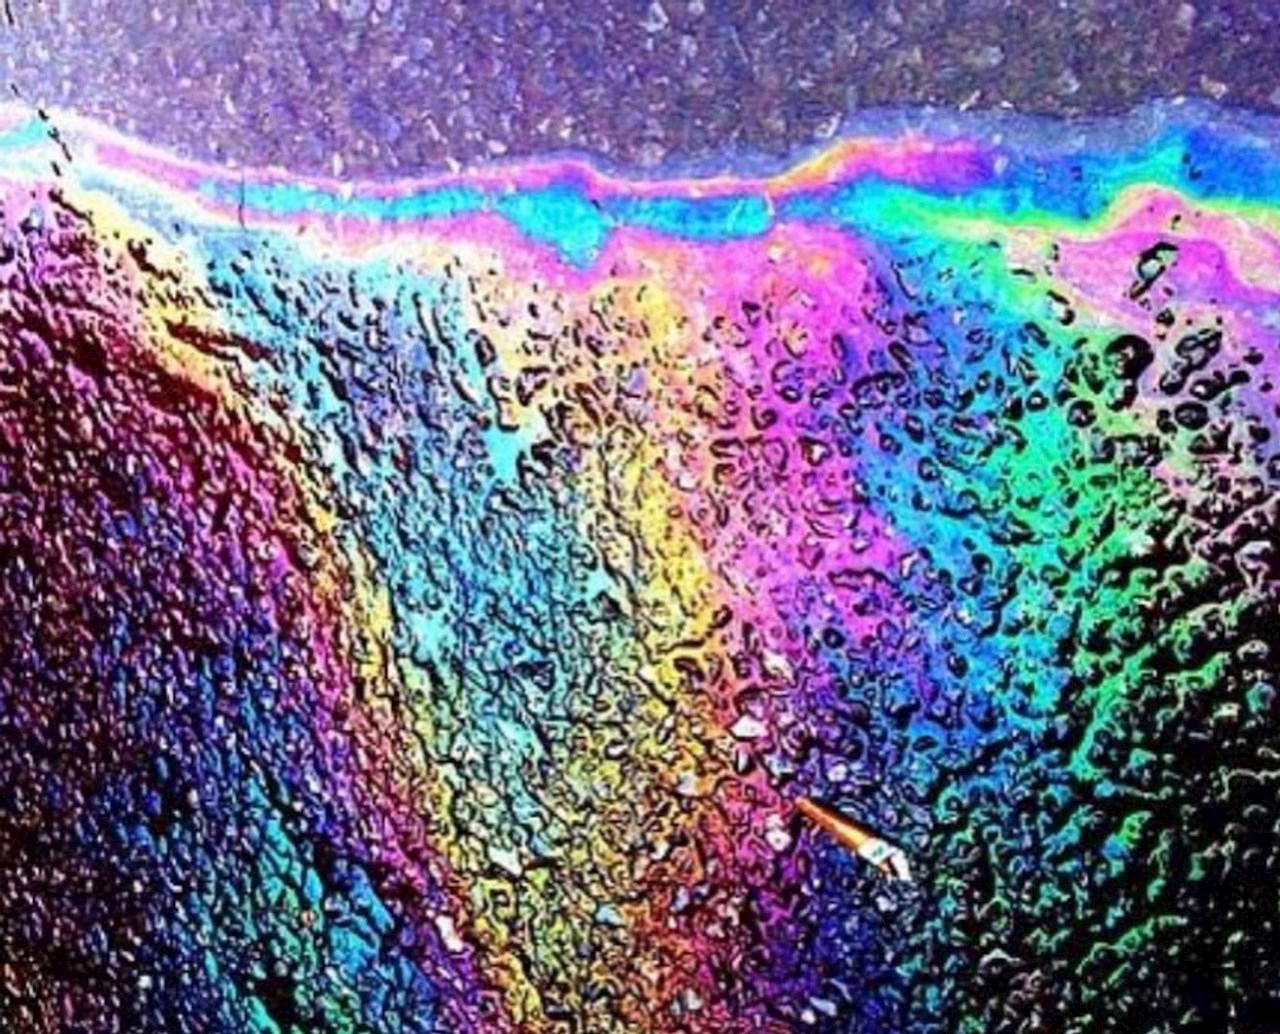 Why do oily puddles on the driveway have rainbow colors?